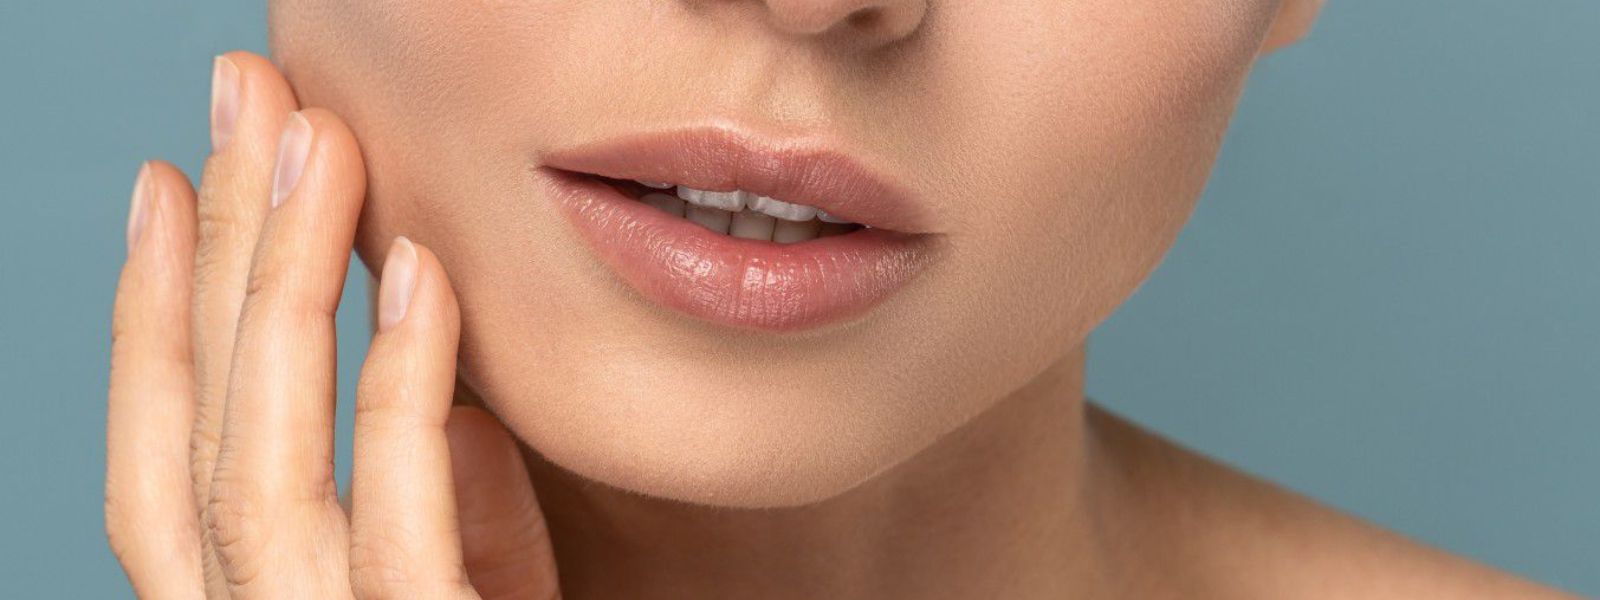 Does Kybella work